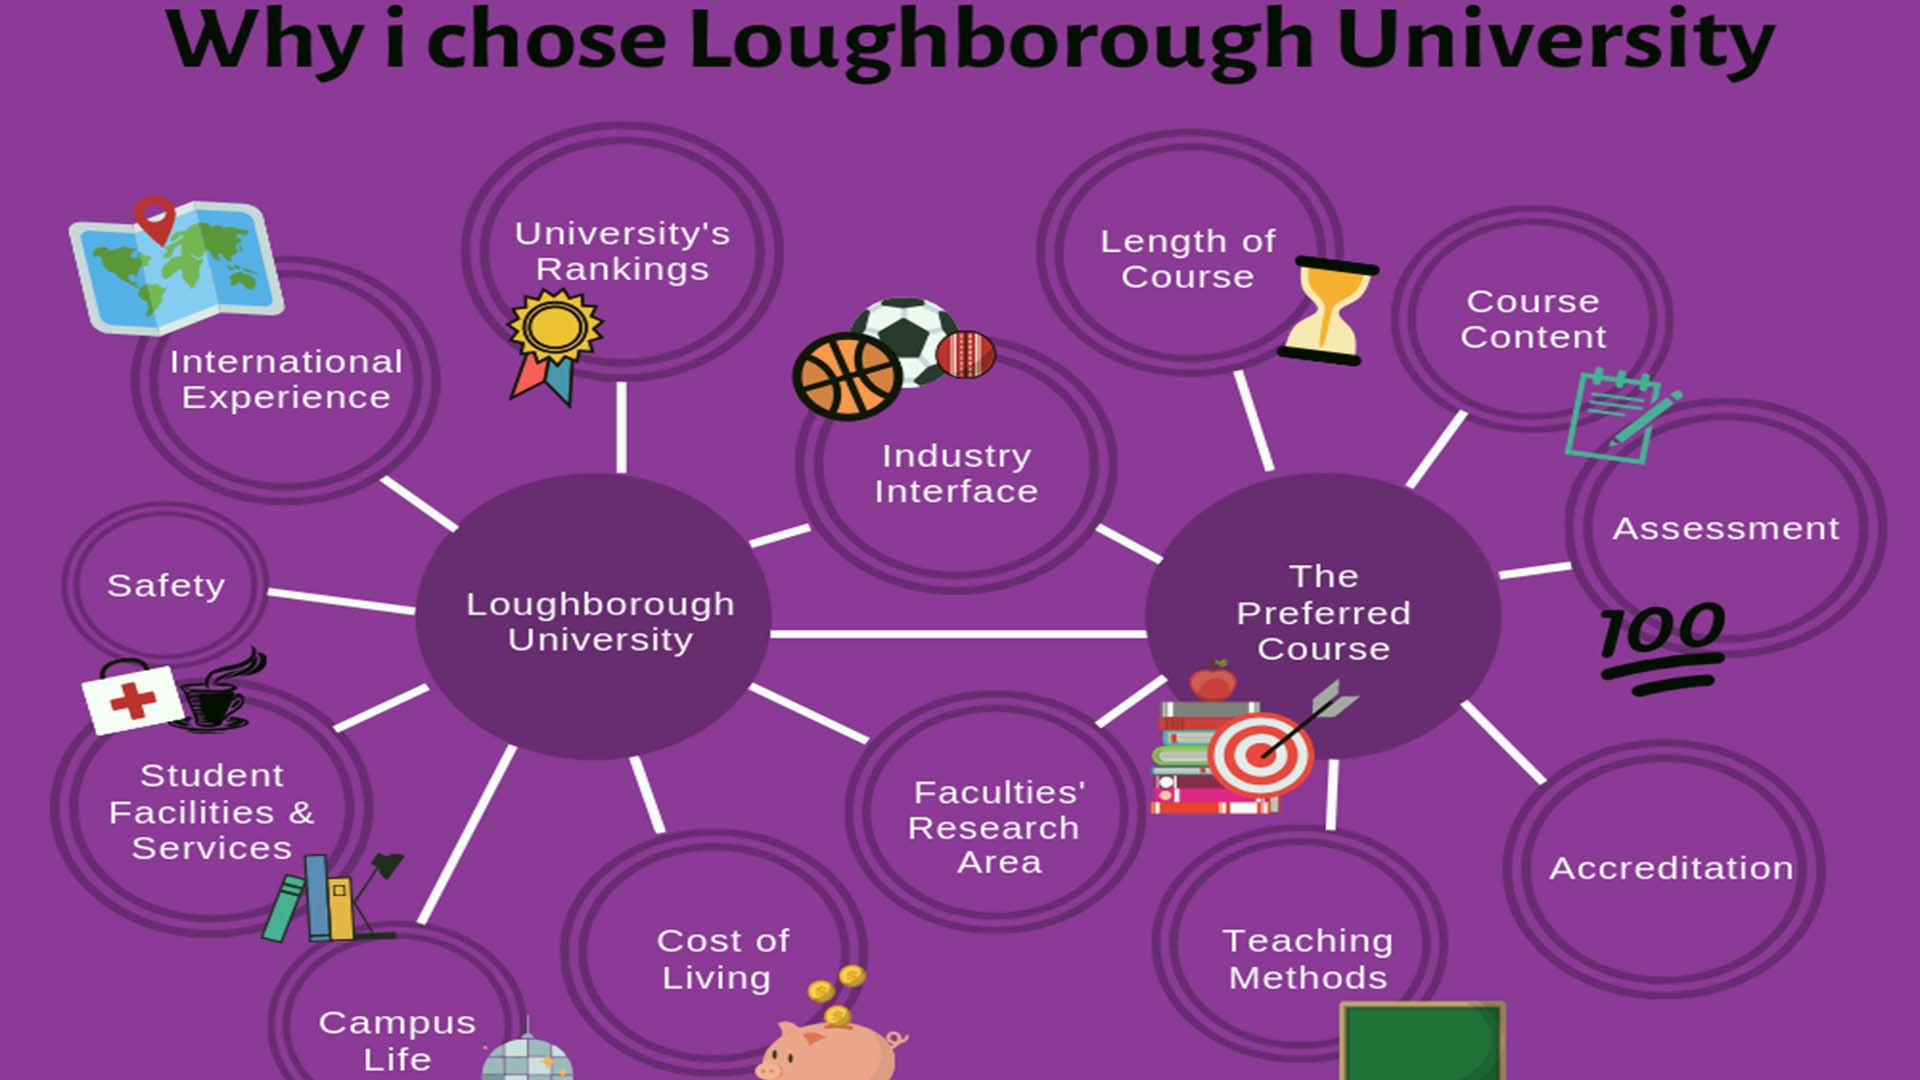 The first mindmap has Loughborough Uni in the middle and around the outside has university's rankings,industry interface,facilities research area,cost of living,campus life,student facilities & services,safety,and international experience. The second mindmap has preferred course in the middle and around the outside has length of course,course content,assessment,accreditation,and teaching methods.